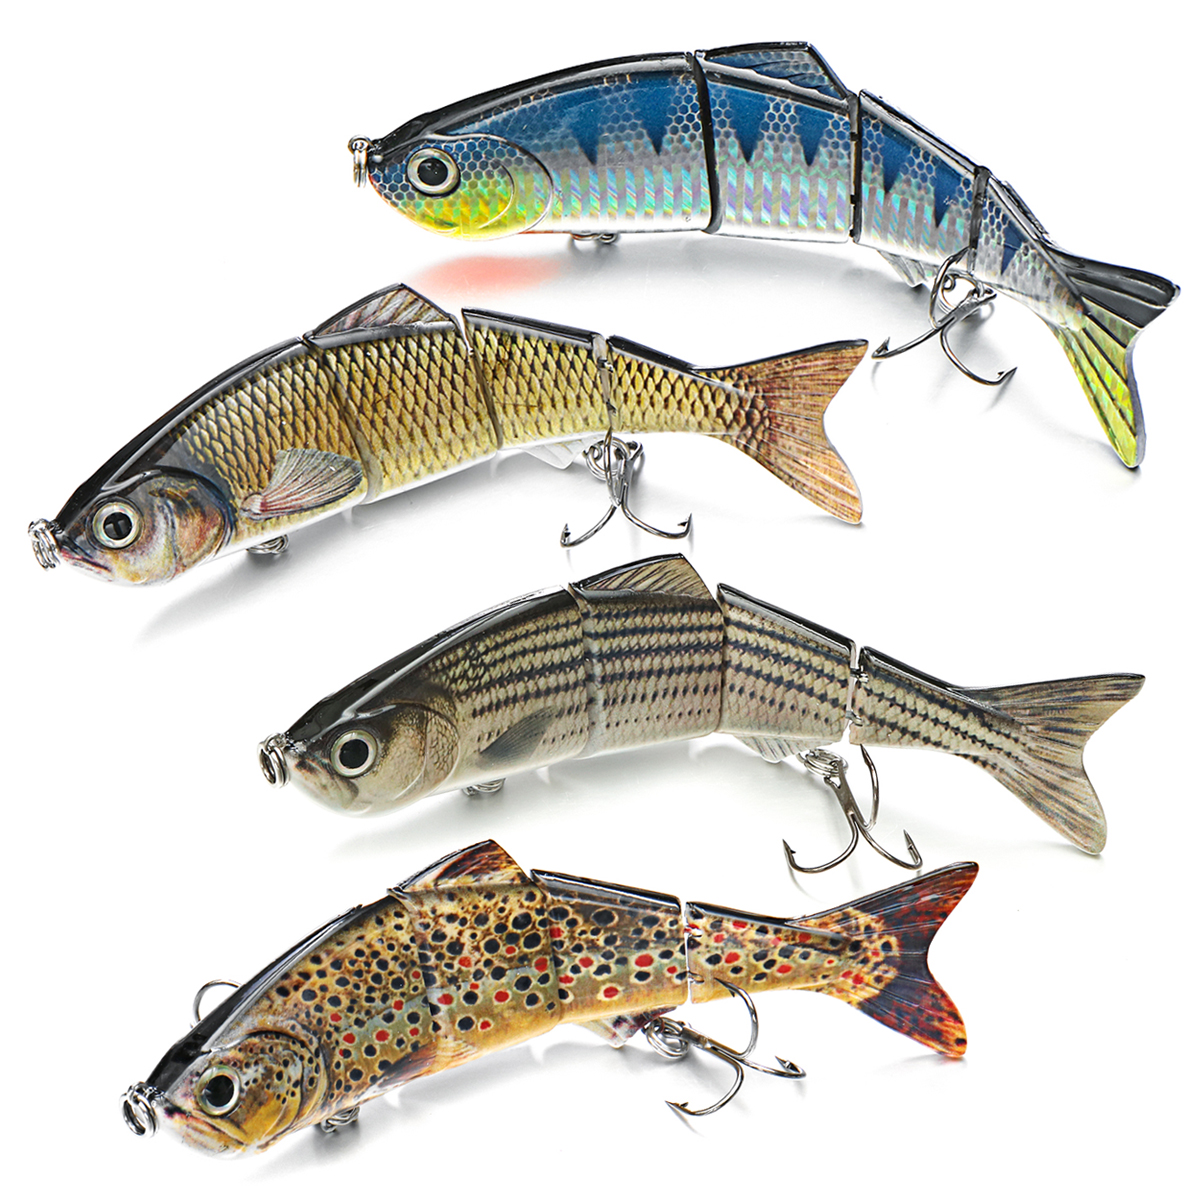 

ZANLURE 15CM fish lures 4D Rattle Trout Shad Lures - Pike Zander Salmon Predator Fishing